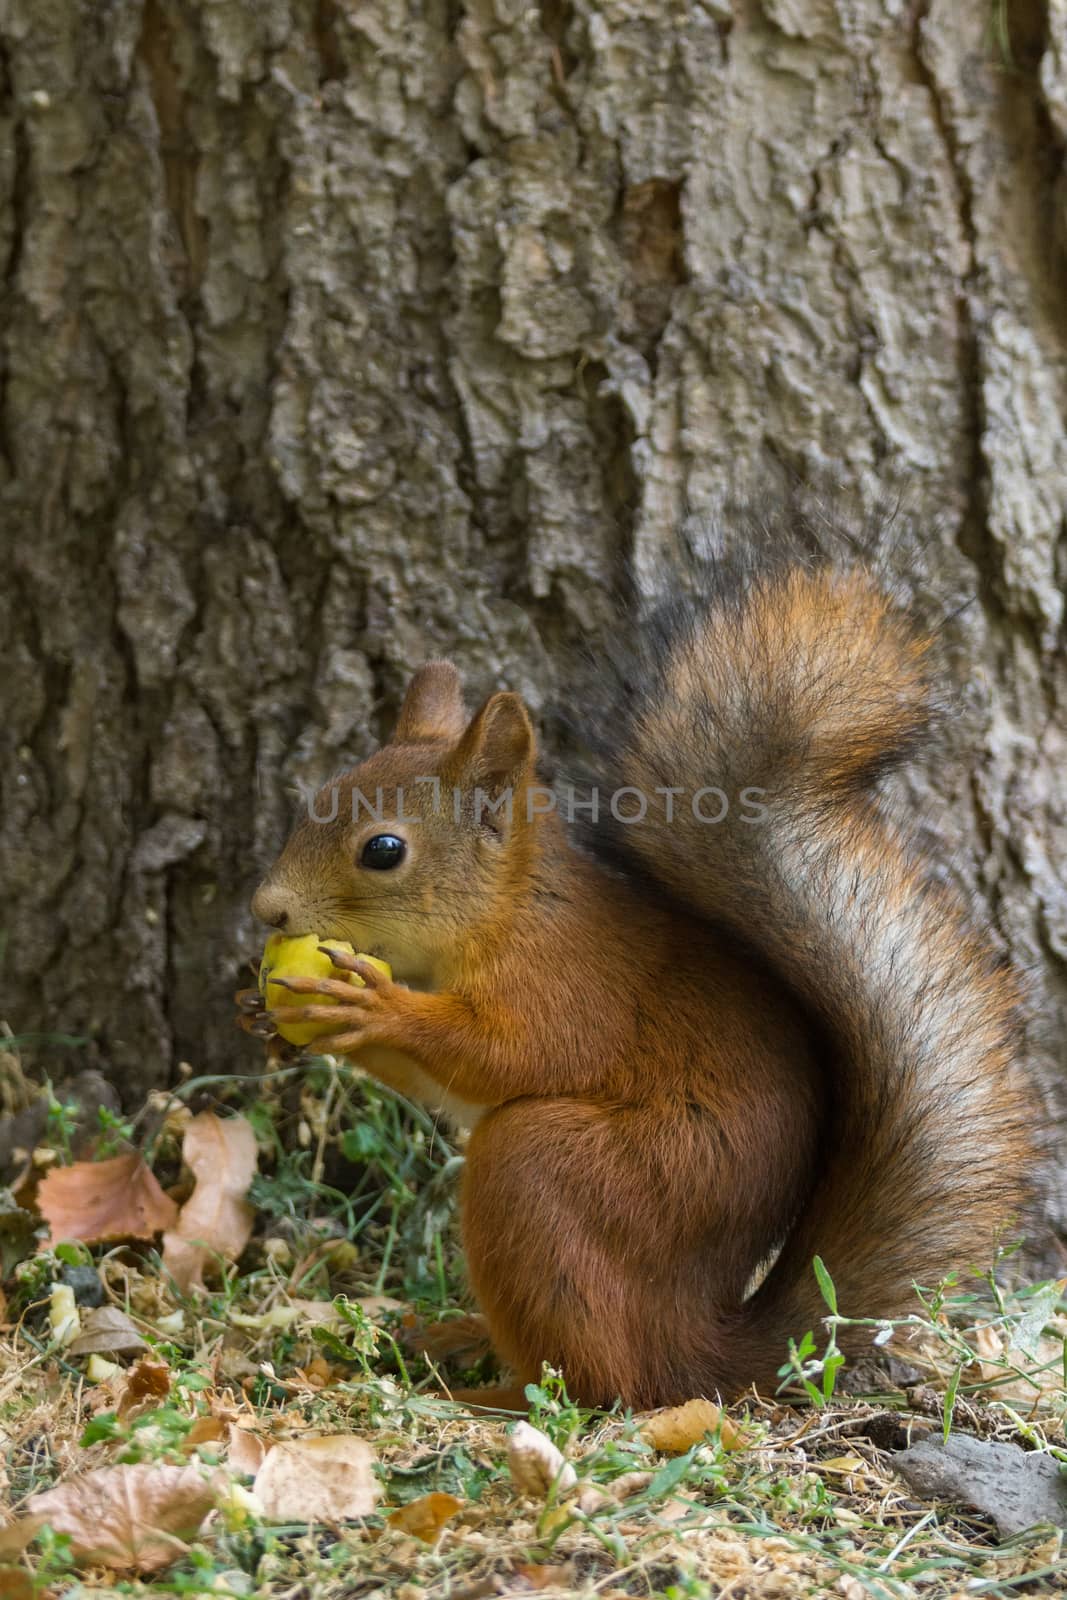 The photograph shows a squirrel on the tree